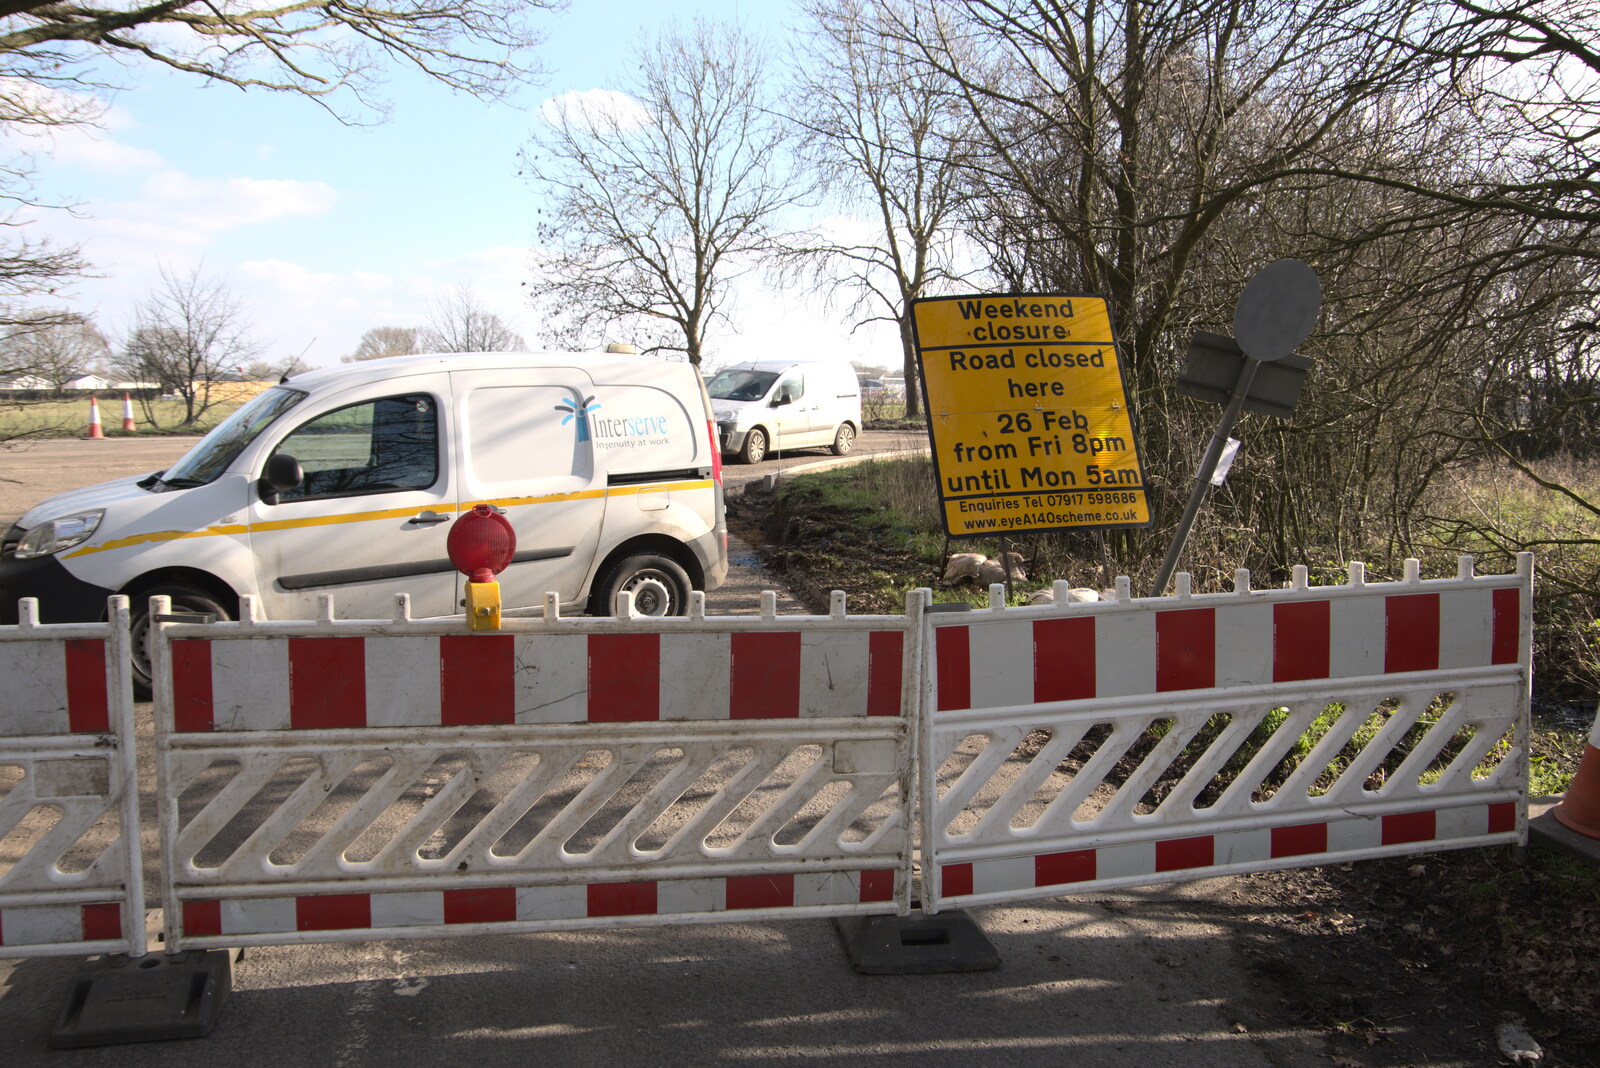 The Thrandeston Road is closed too from Fred's New Bike and an A140 Closure, Brome, Suffolk - 27th February 2021